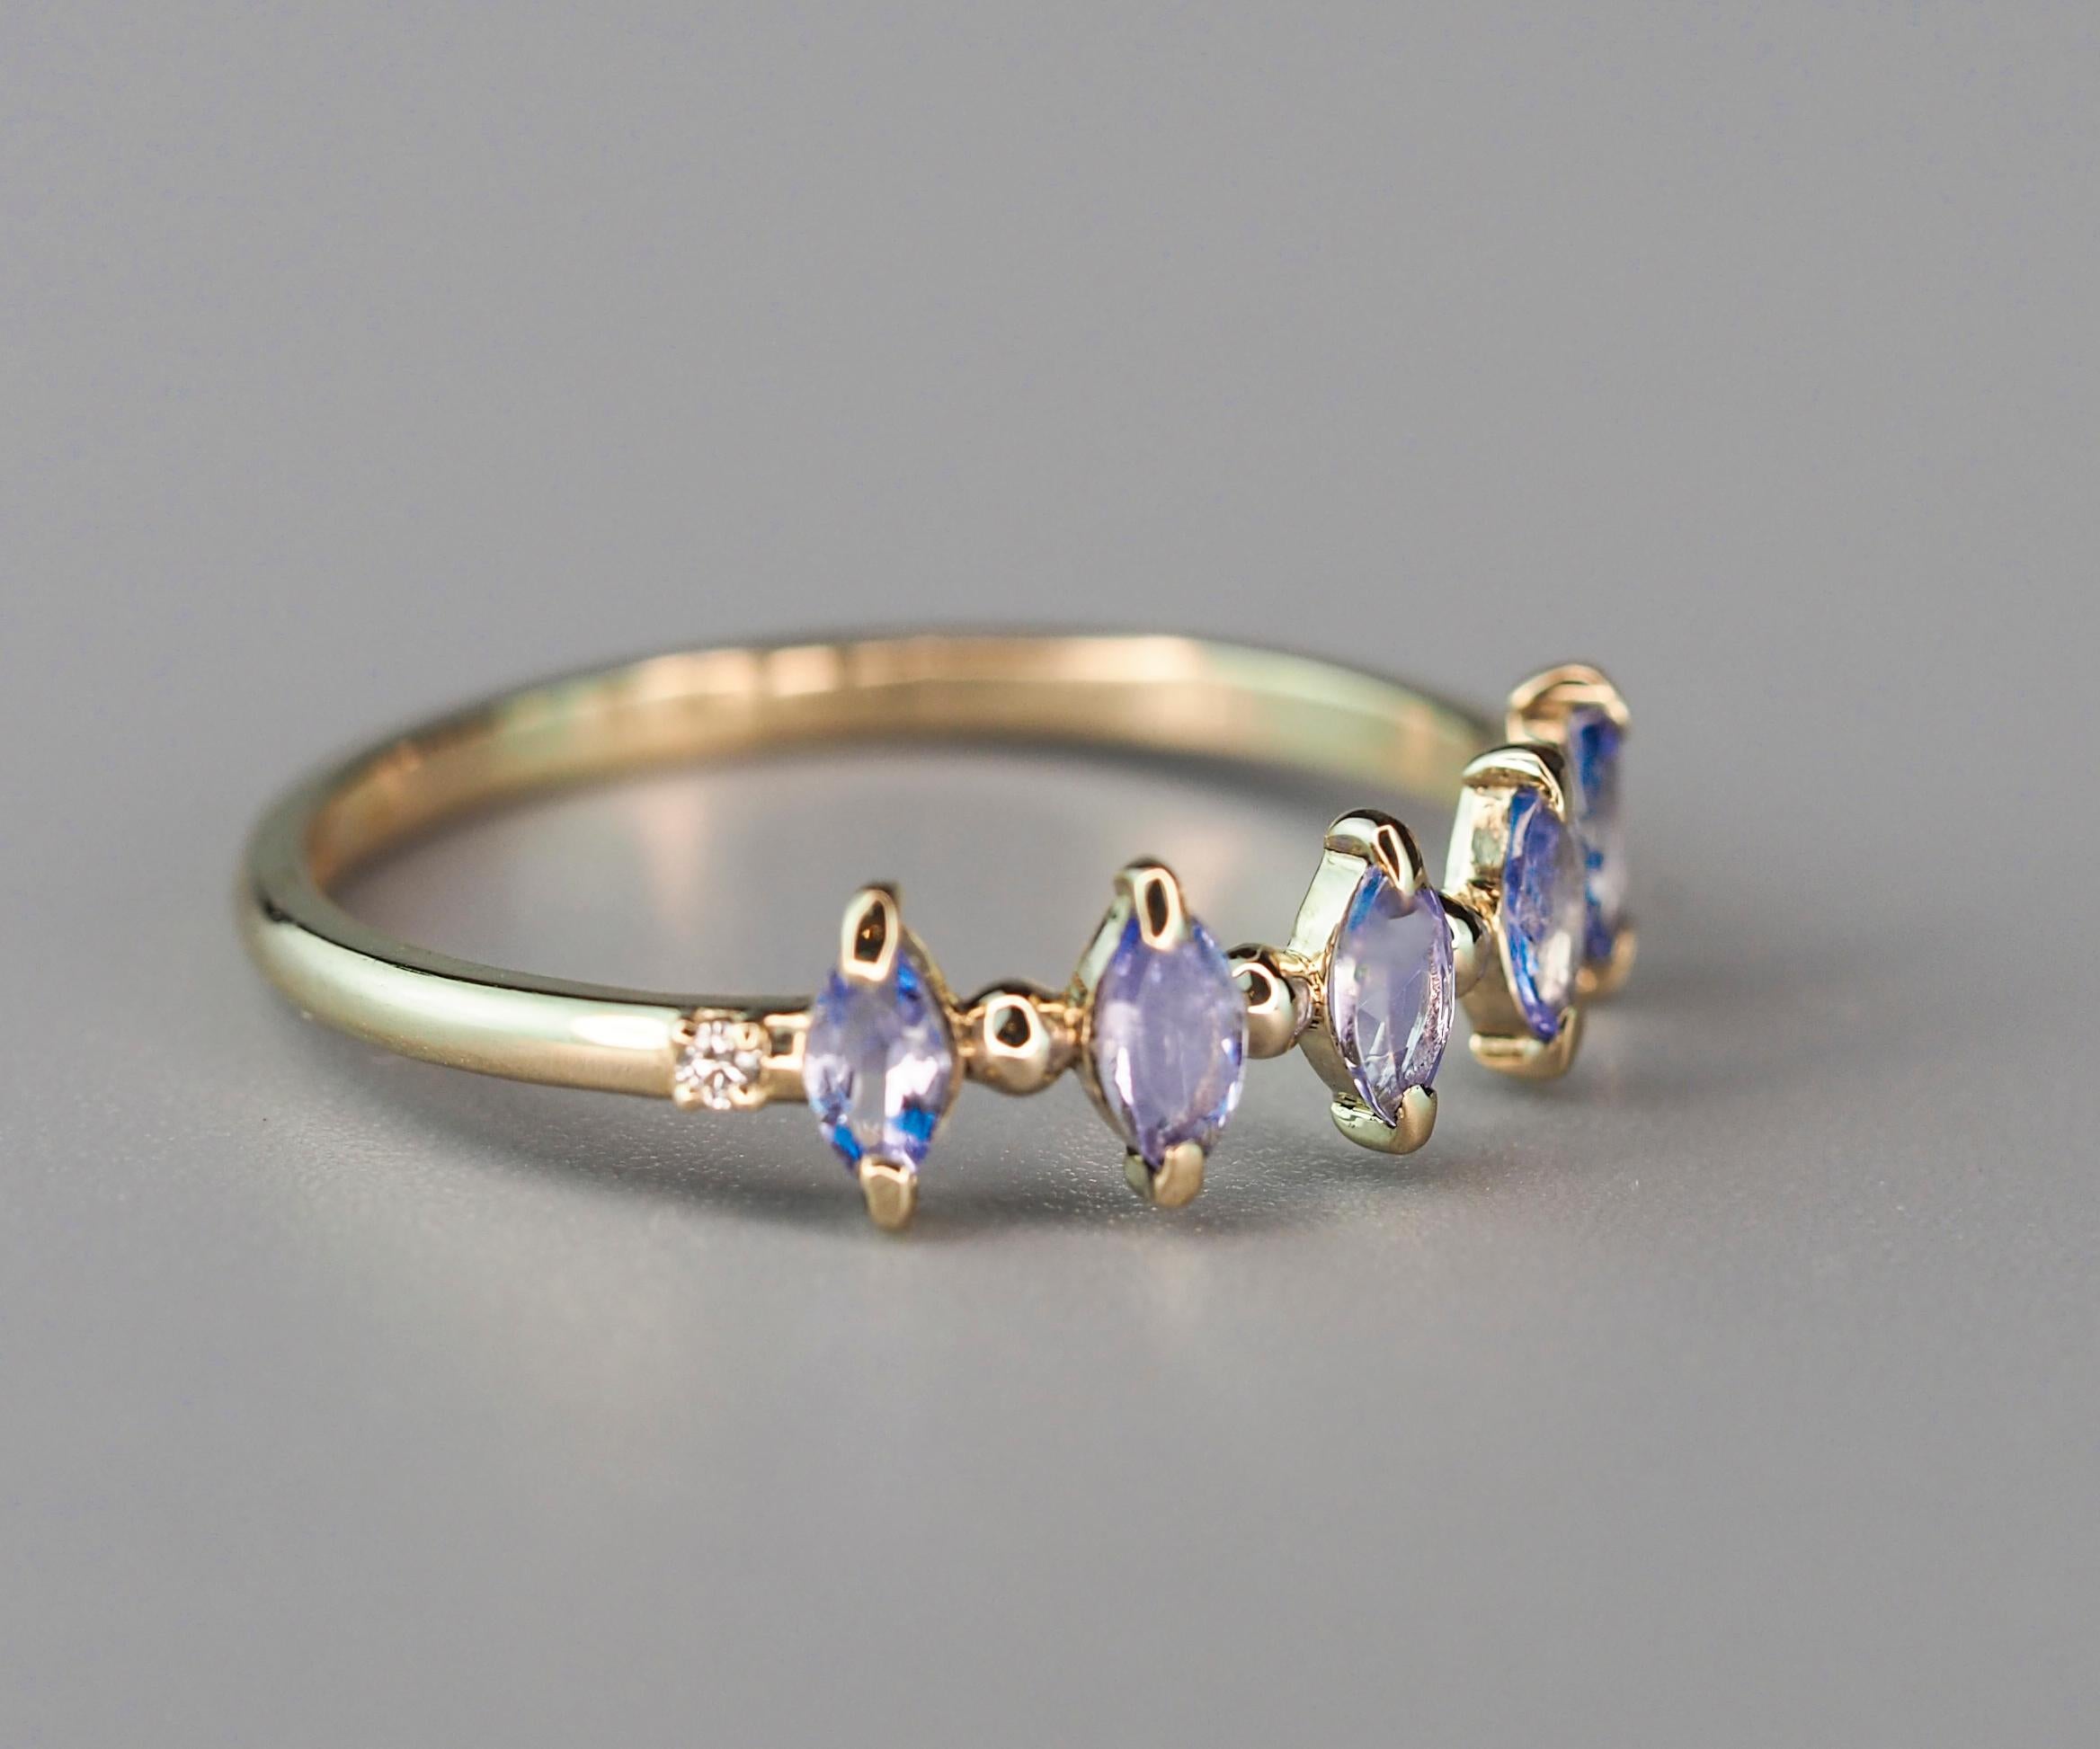 For Sale:  14k Gold Half Eternity Ring with Tanzanite and Diamonds 5